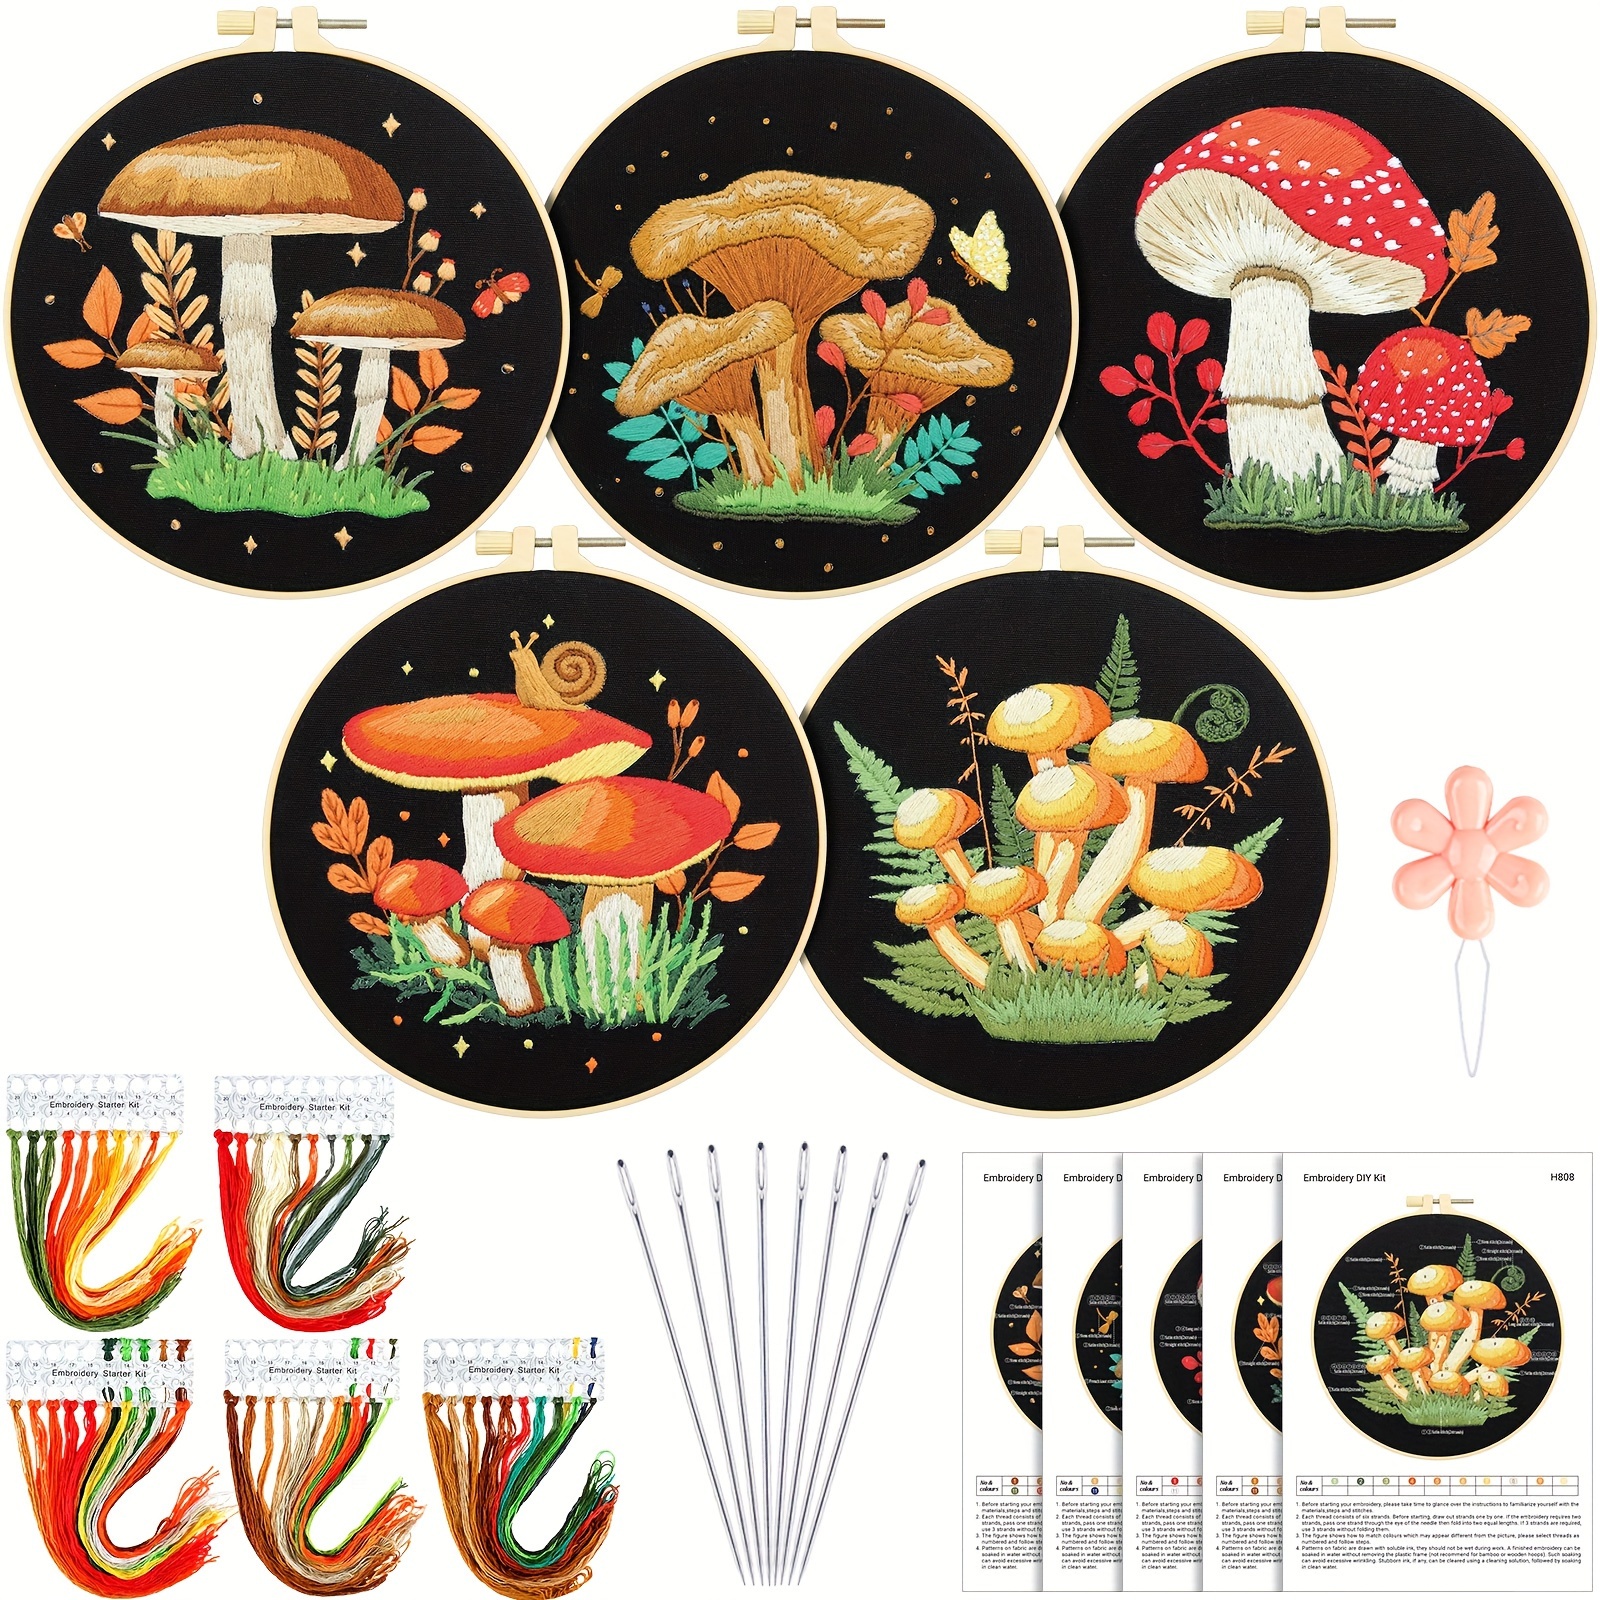 

5 Sets Mushroom Embroidery Kit For Beginners With Patterns Mushroom Cross Stitch Set Diy Adult Hand Needlepoint Embroidery Starter Set With Mushroom Pattern Embroidery Hoops Needles Threads